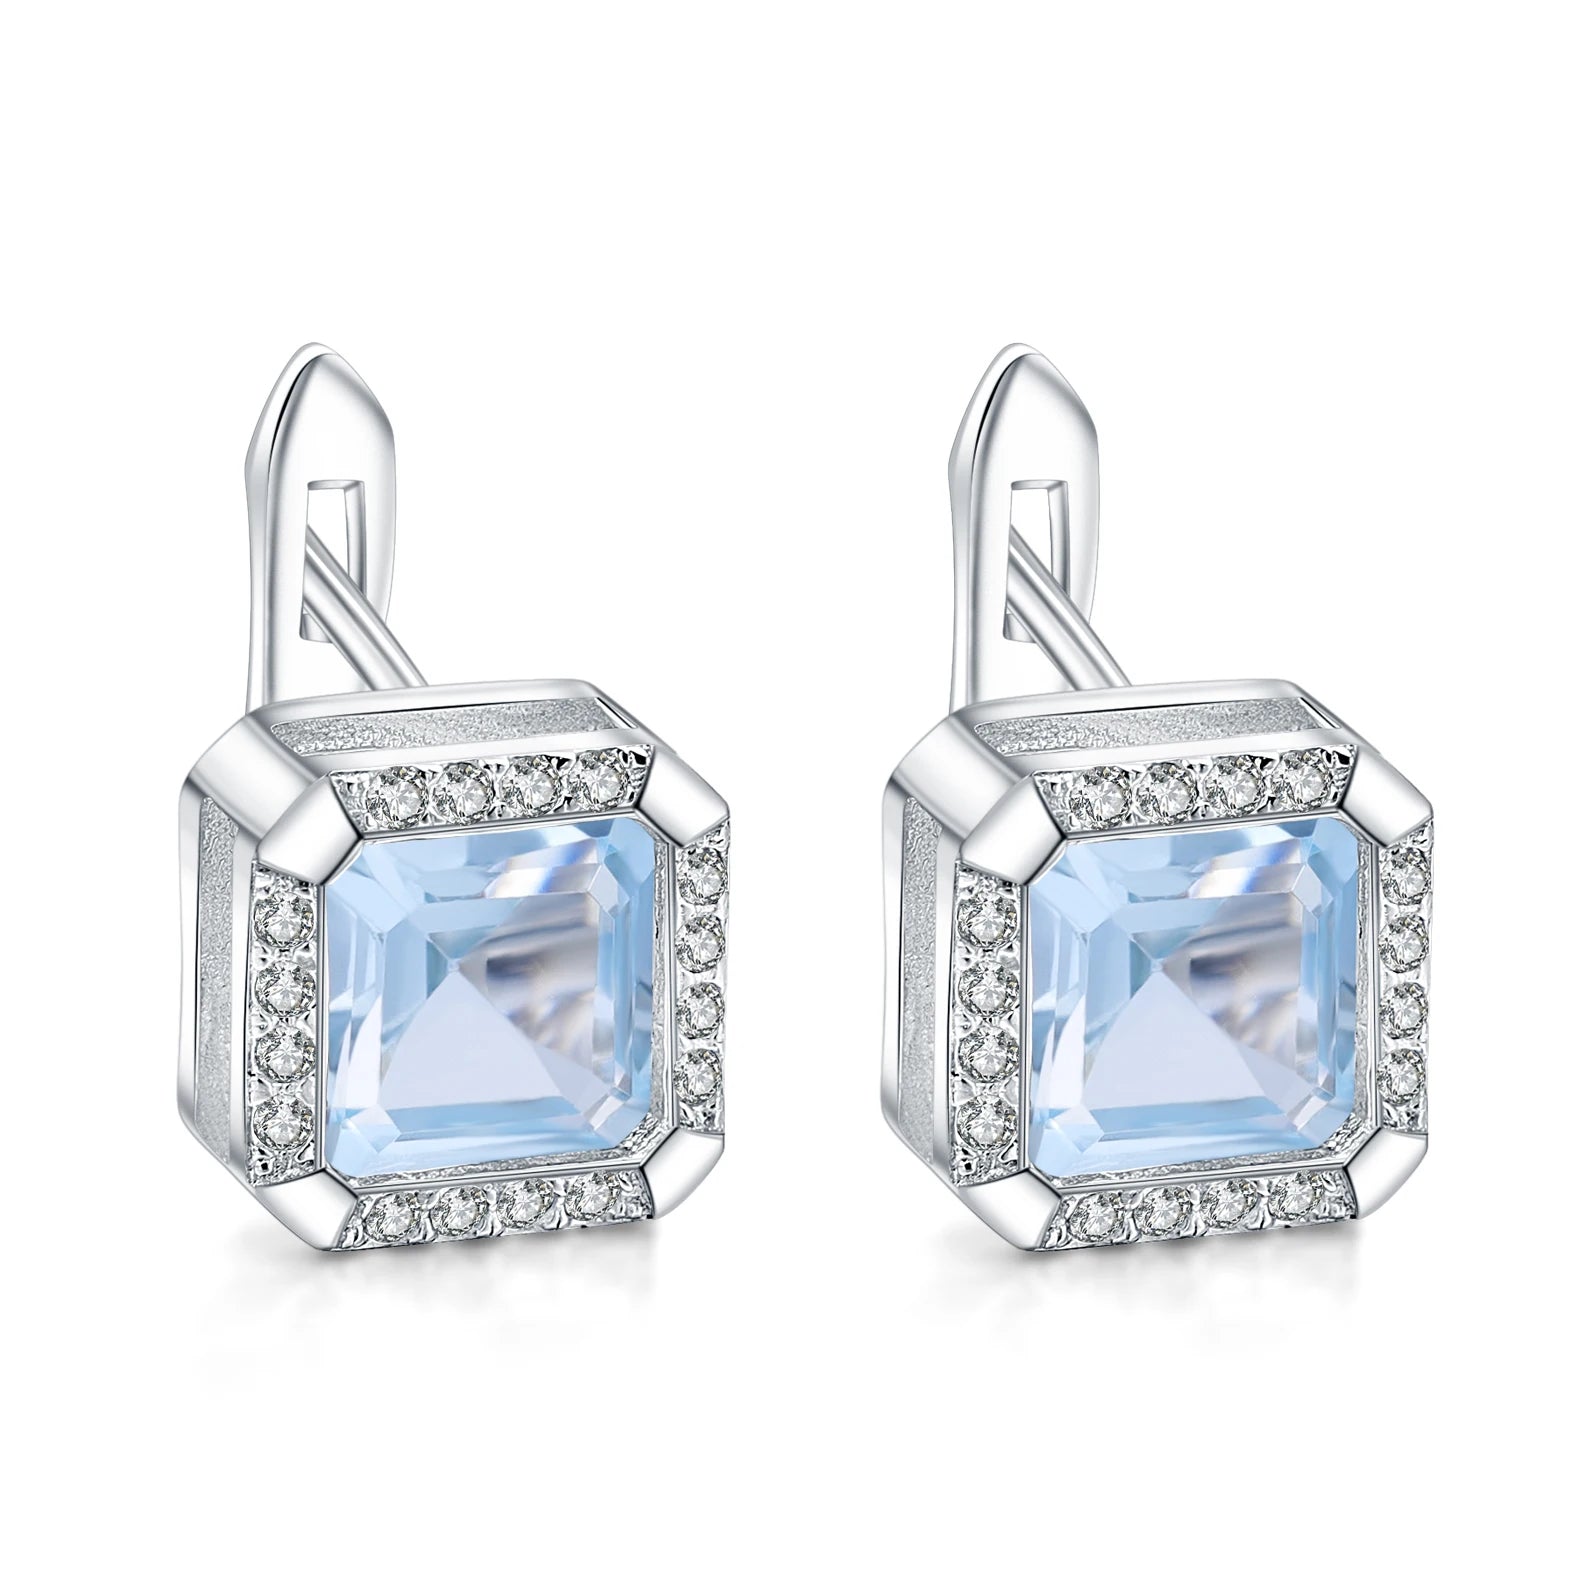 Gem's Ballet 3.77Ct Natural Iolite Blue Mystic Quartz Gemstone Clip Earrings 925 Sterling Silver Fine Jewelry For Women Sky Blue Topaz 925 Sterling Silver CHINA